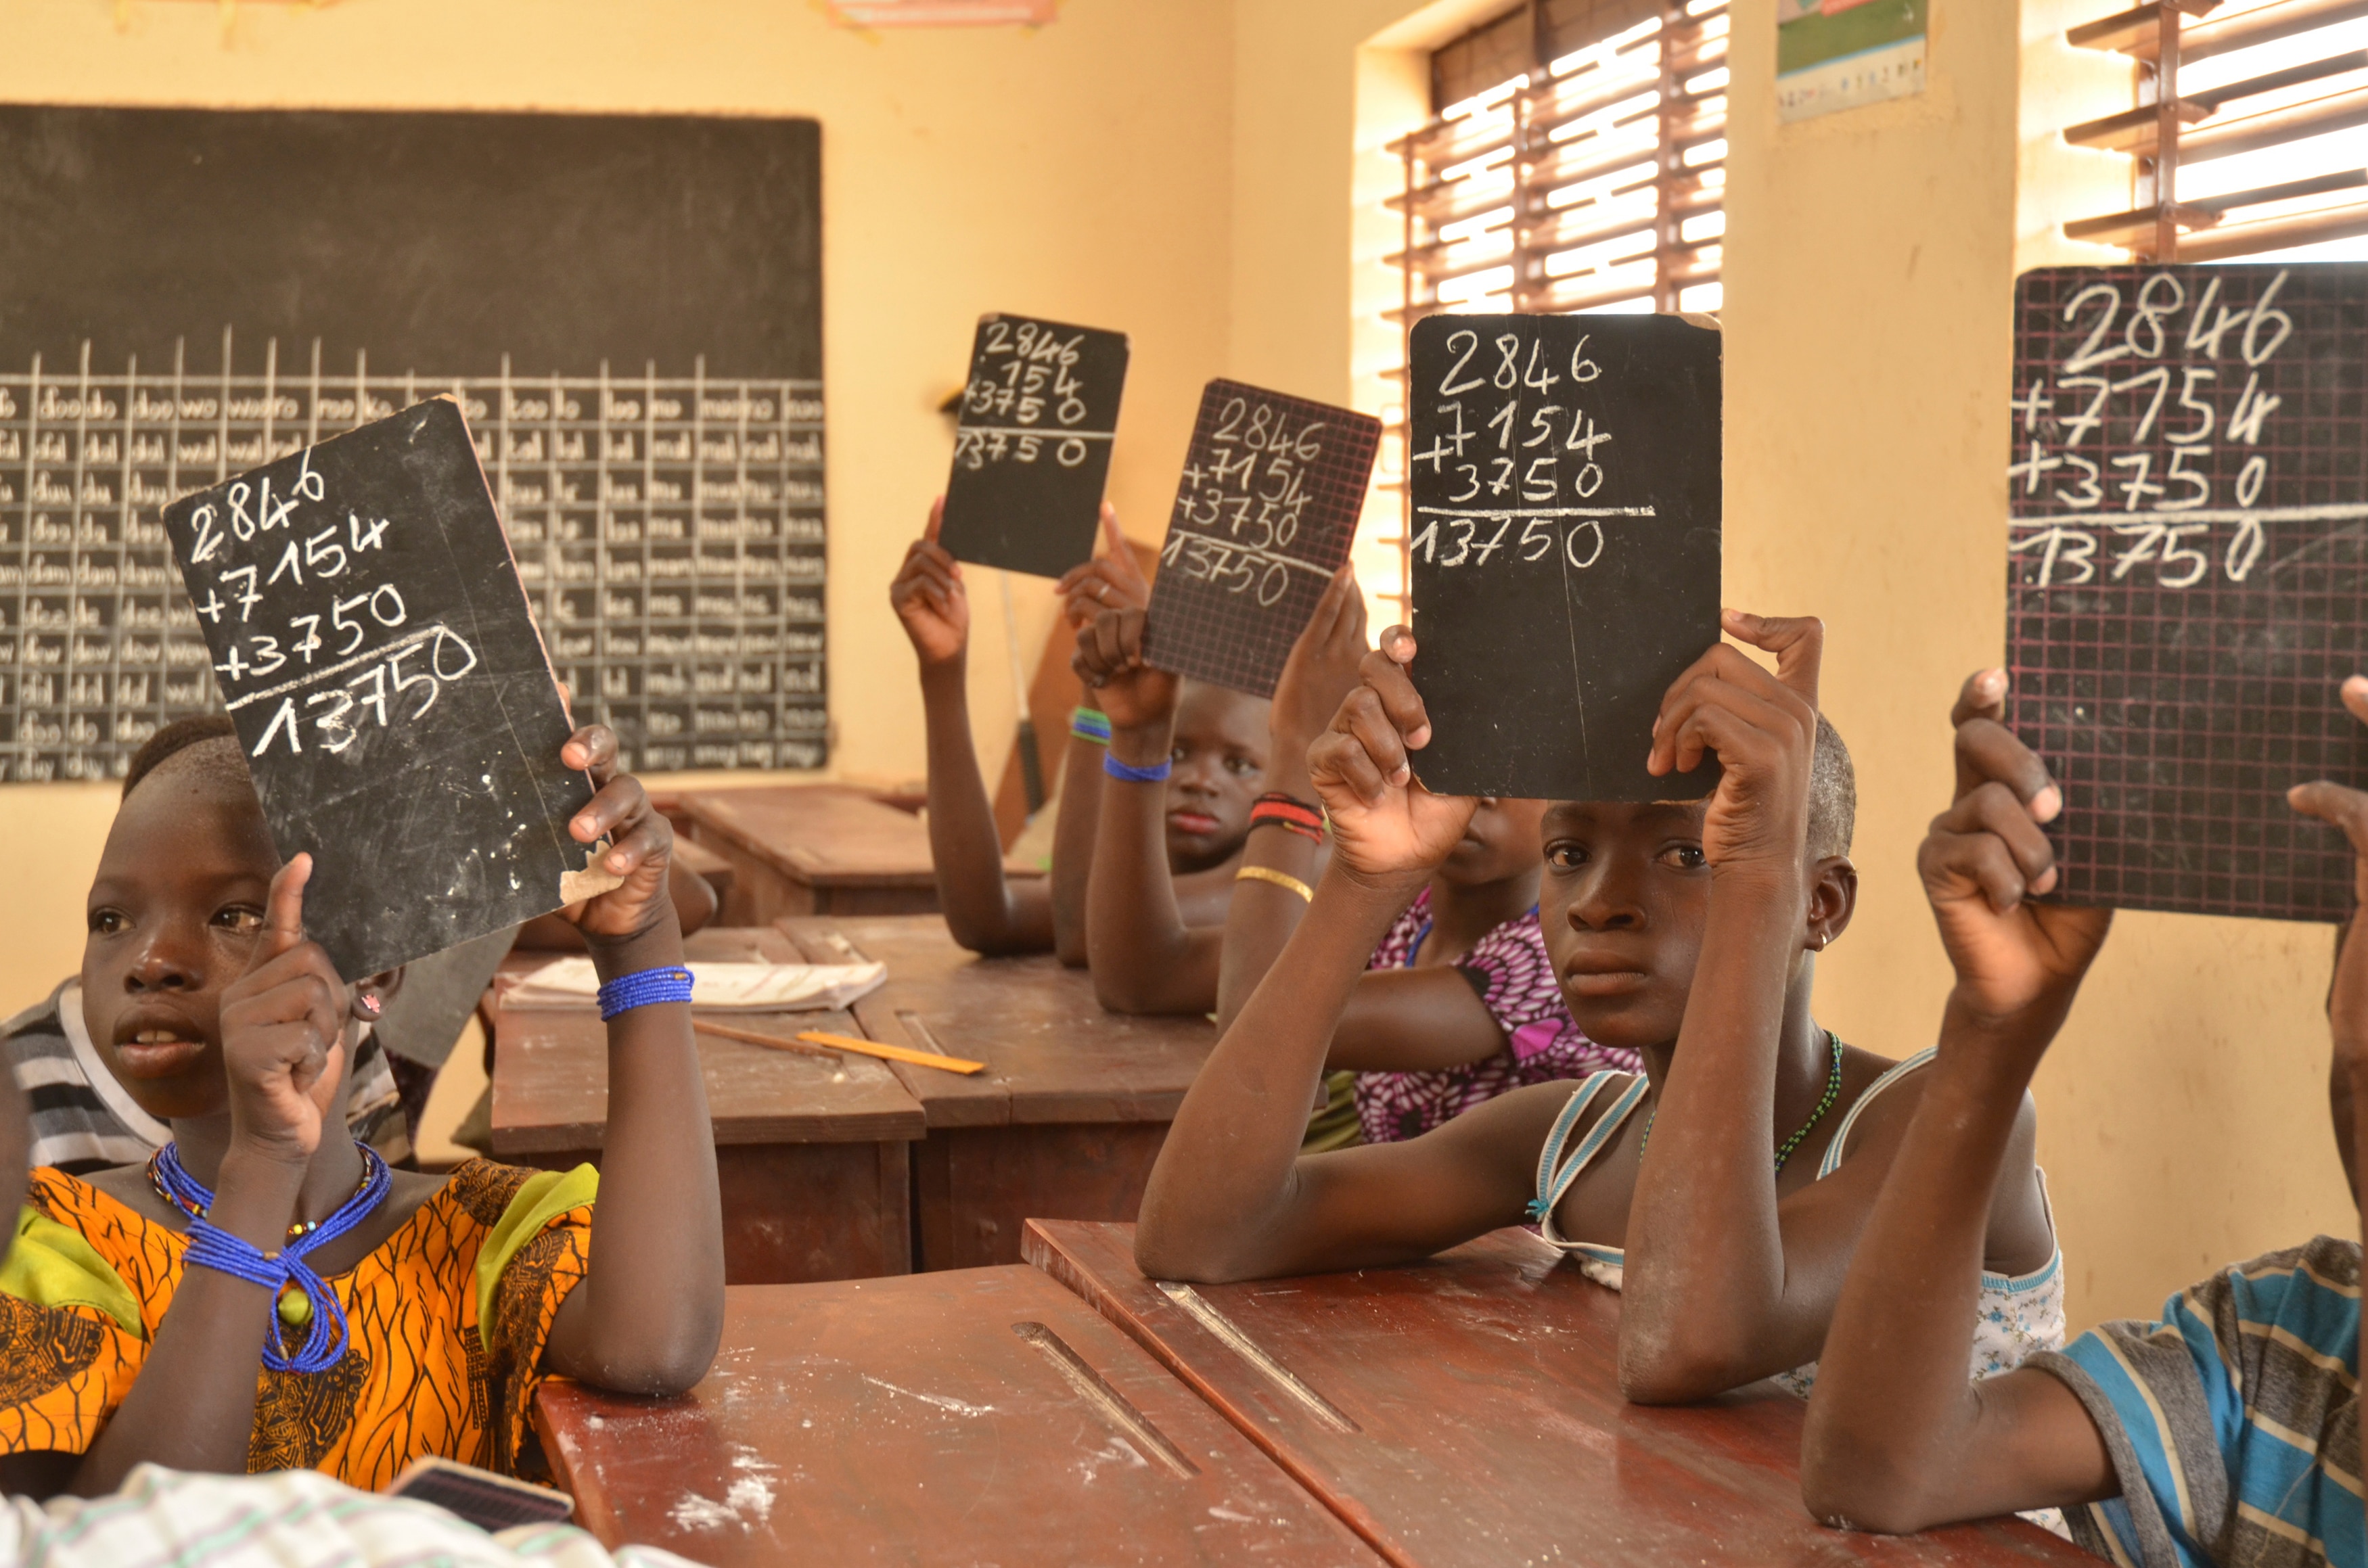 African schoolchildren sitting in a classroom holding up blackboards showing sums.